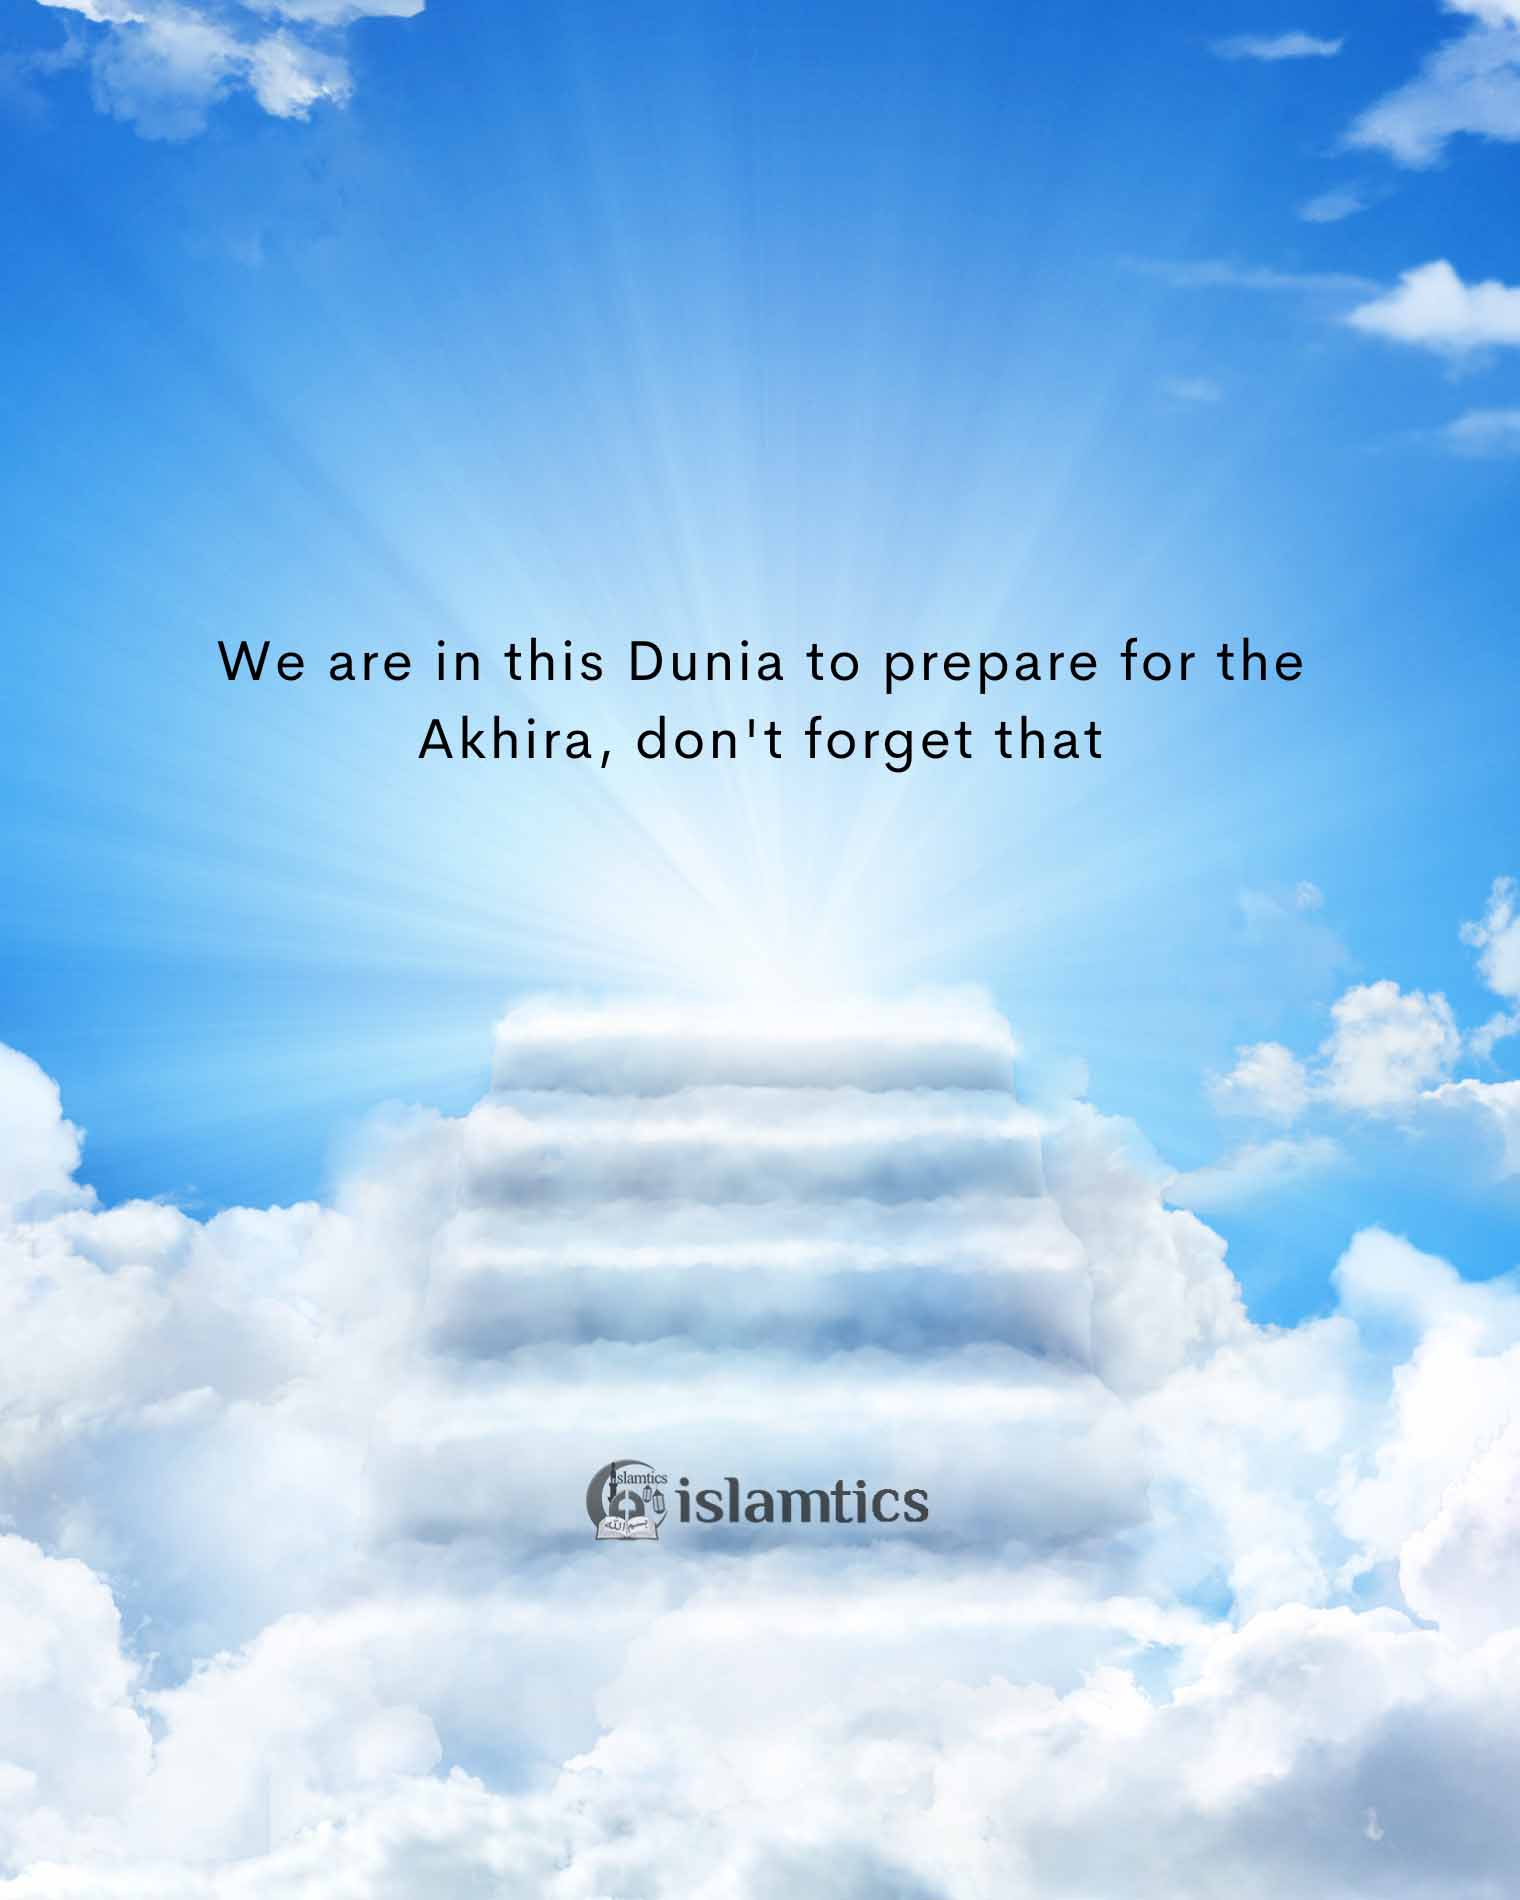  We are in this Dunia to prepare for the Akhira, don’t forget that